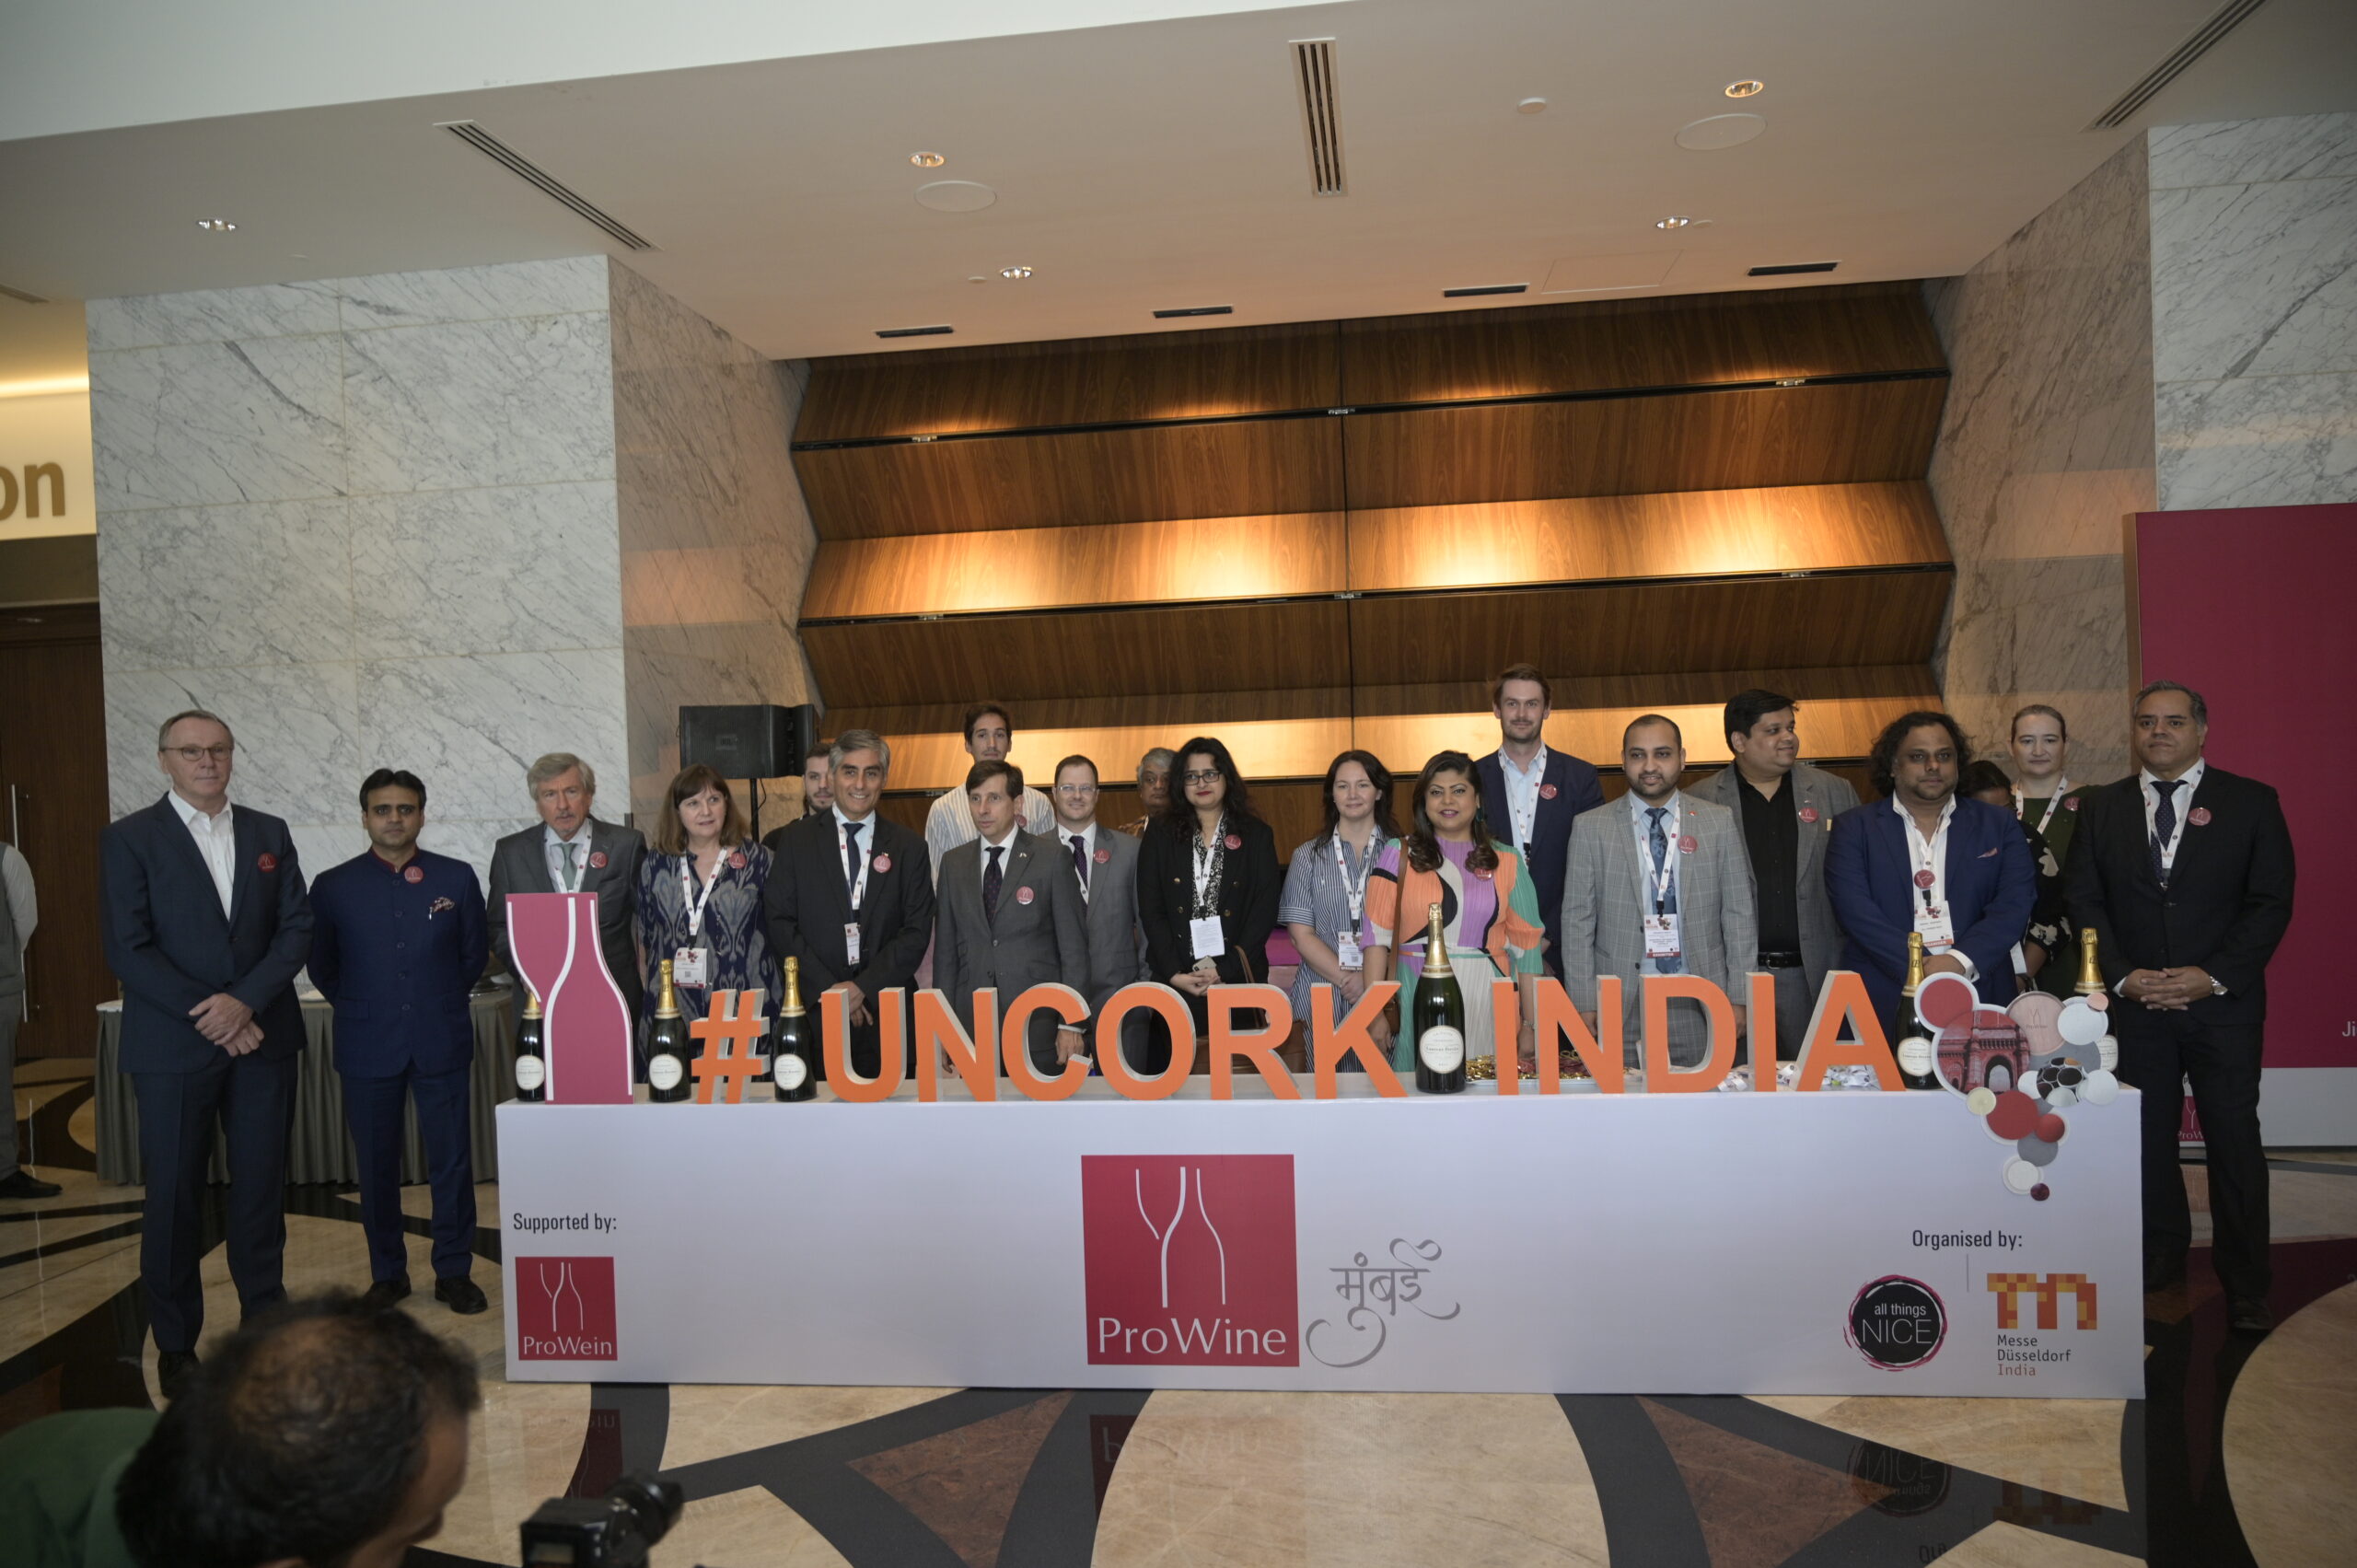 ProWine Mumbai successfully concluded its second edition